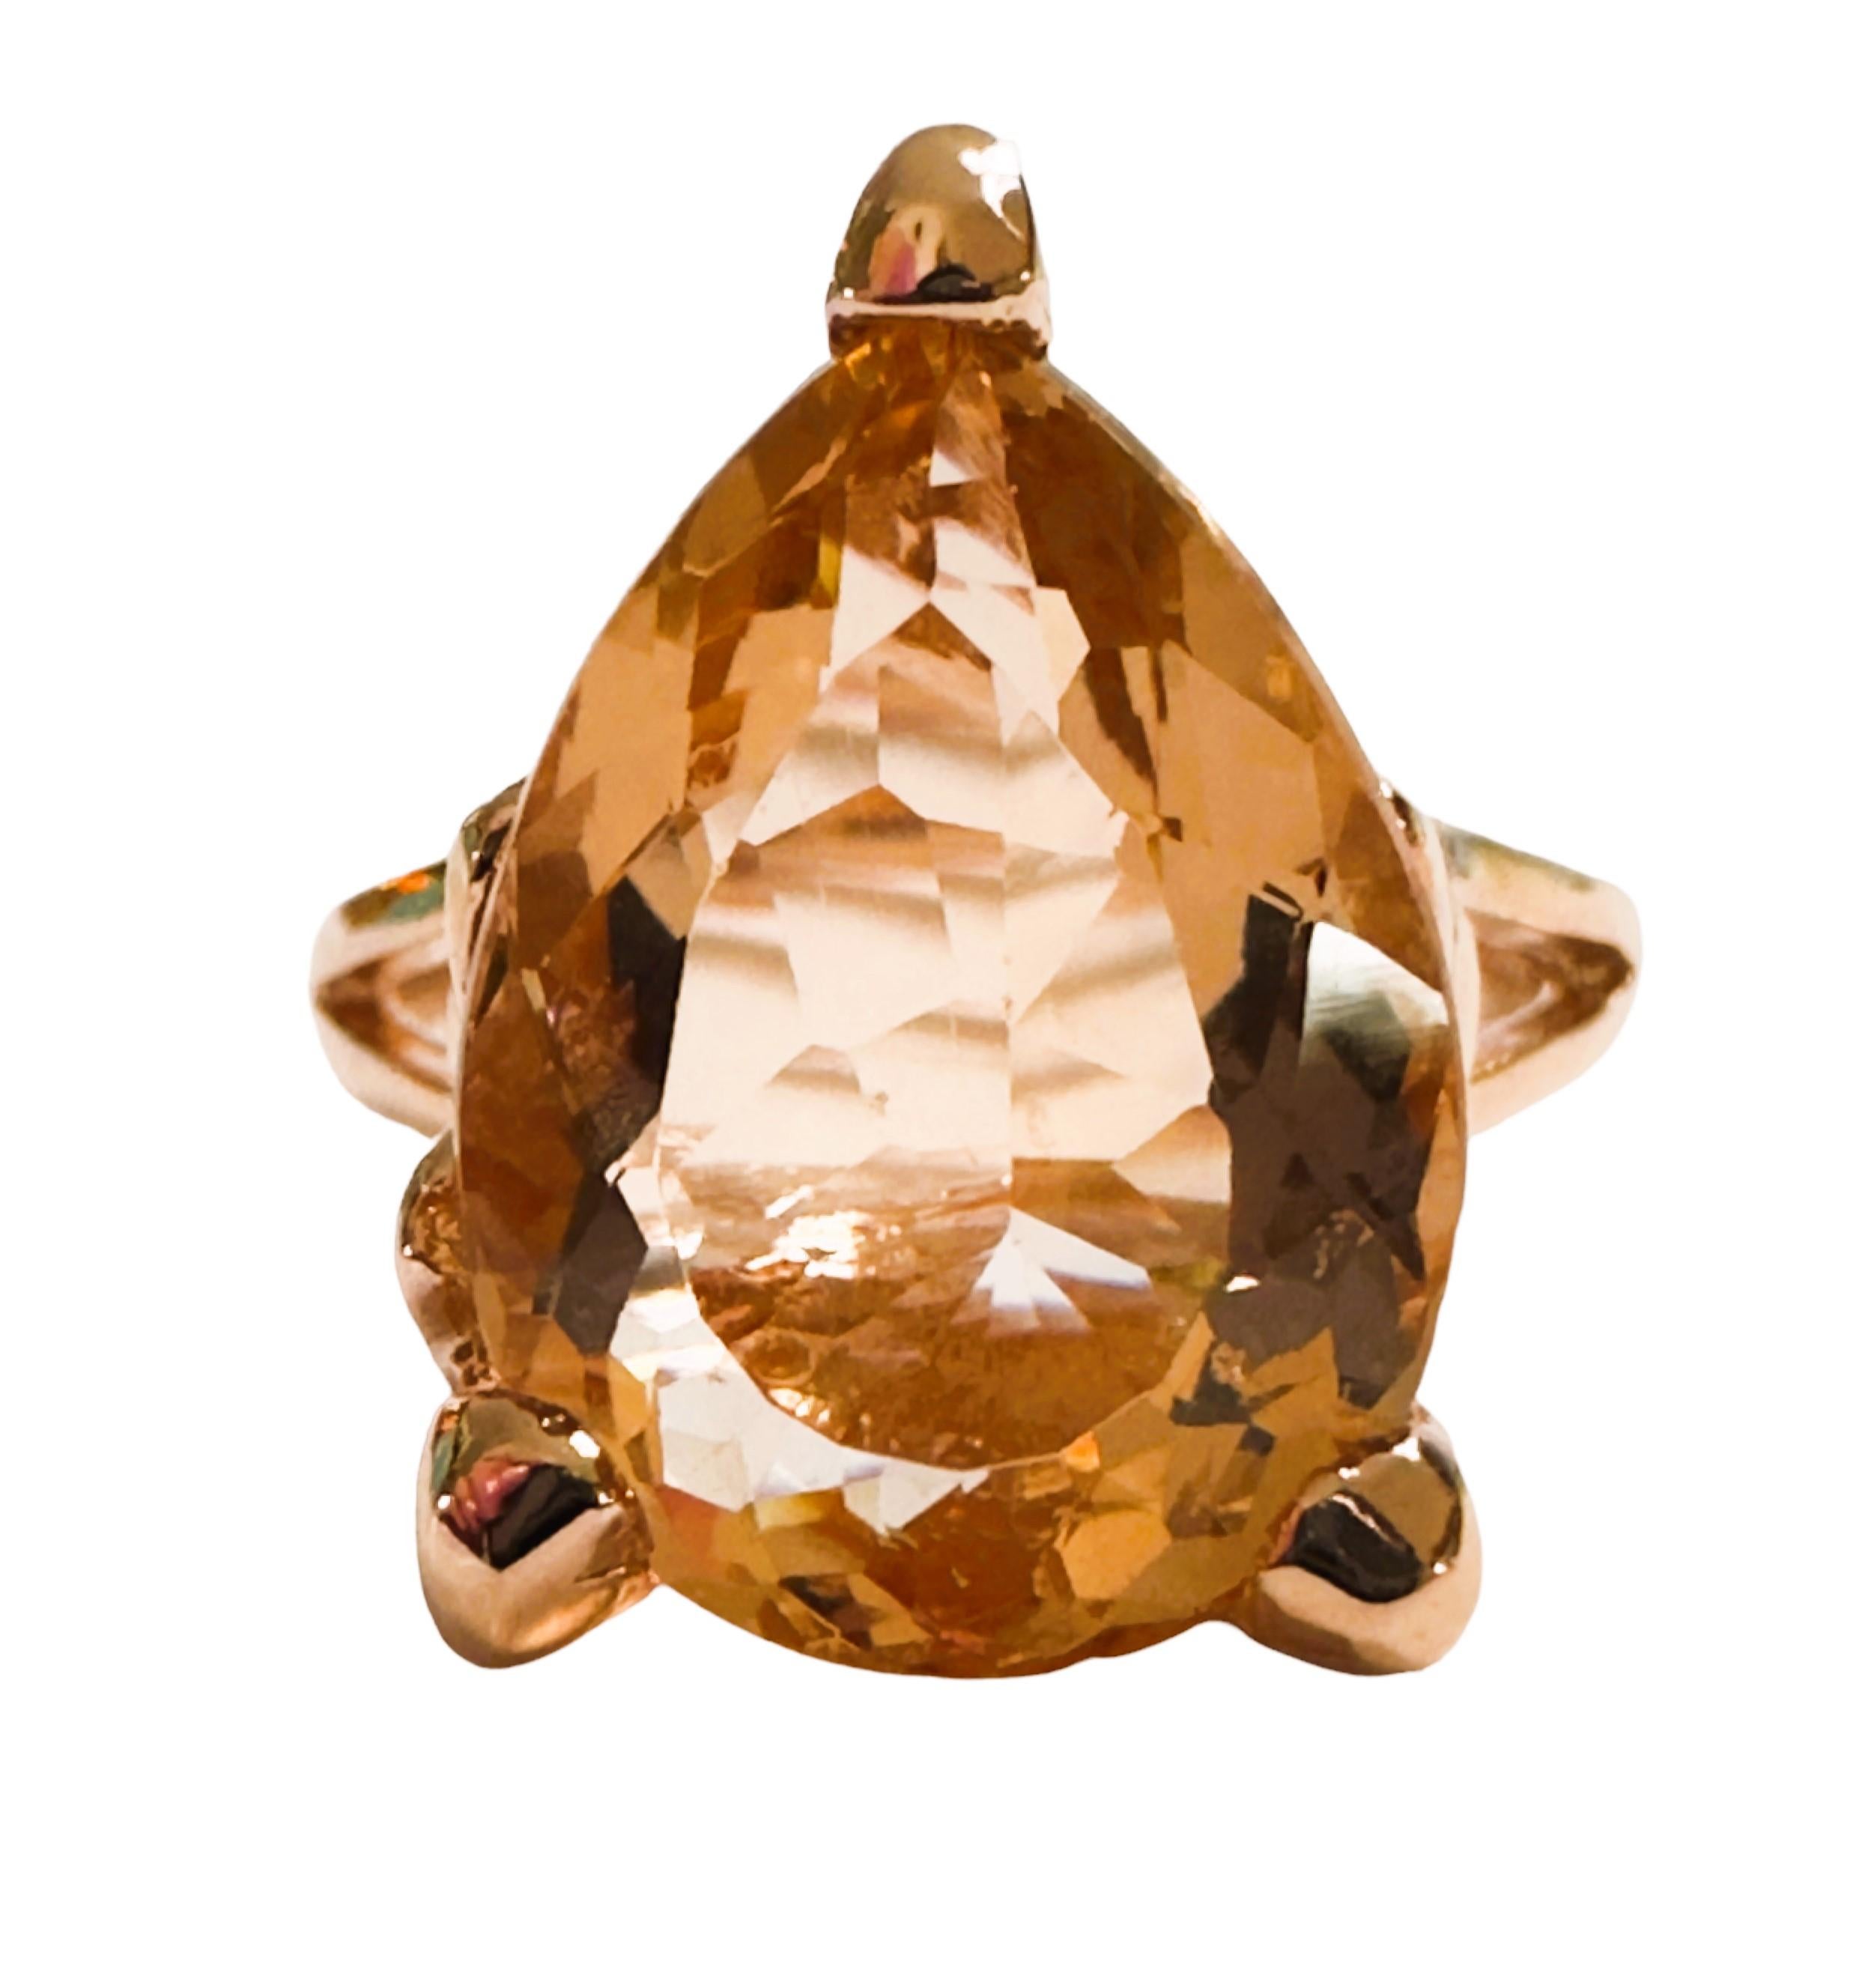 The ring has a beautiful pear cut stone in a rose gold setting which really compliments the colors.  The ring is a size 7.   The stones are from Africa and is just exquisite.  It totals 5.80 Cts and is 15 x 11 mm.  The ring is sizable and can be